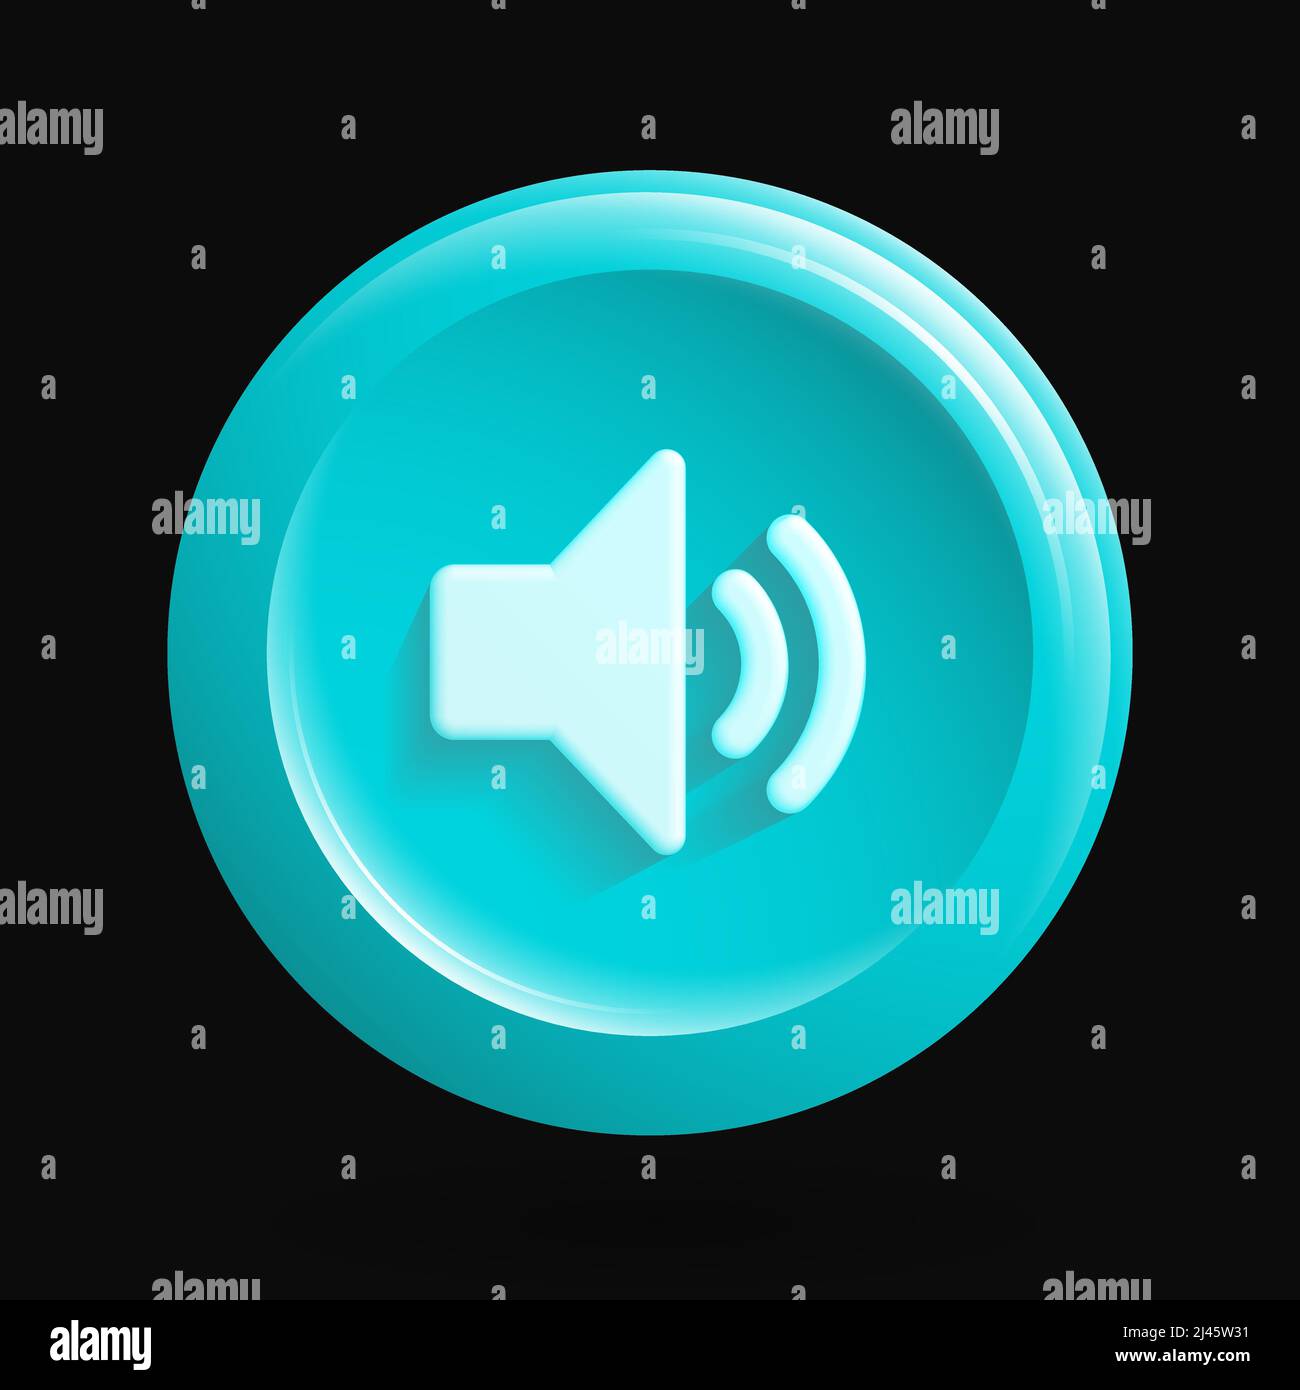 Sound On Isolated Round Icon. Vector illustration Stock Vector